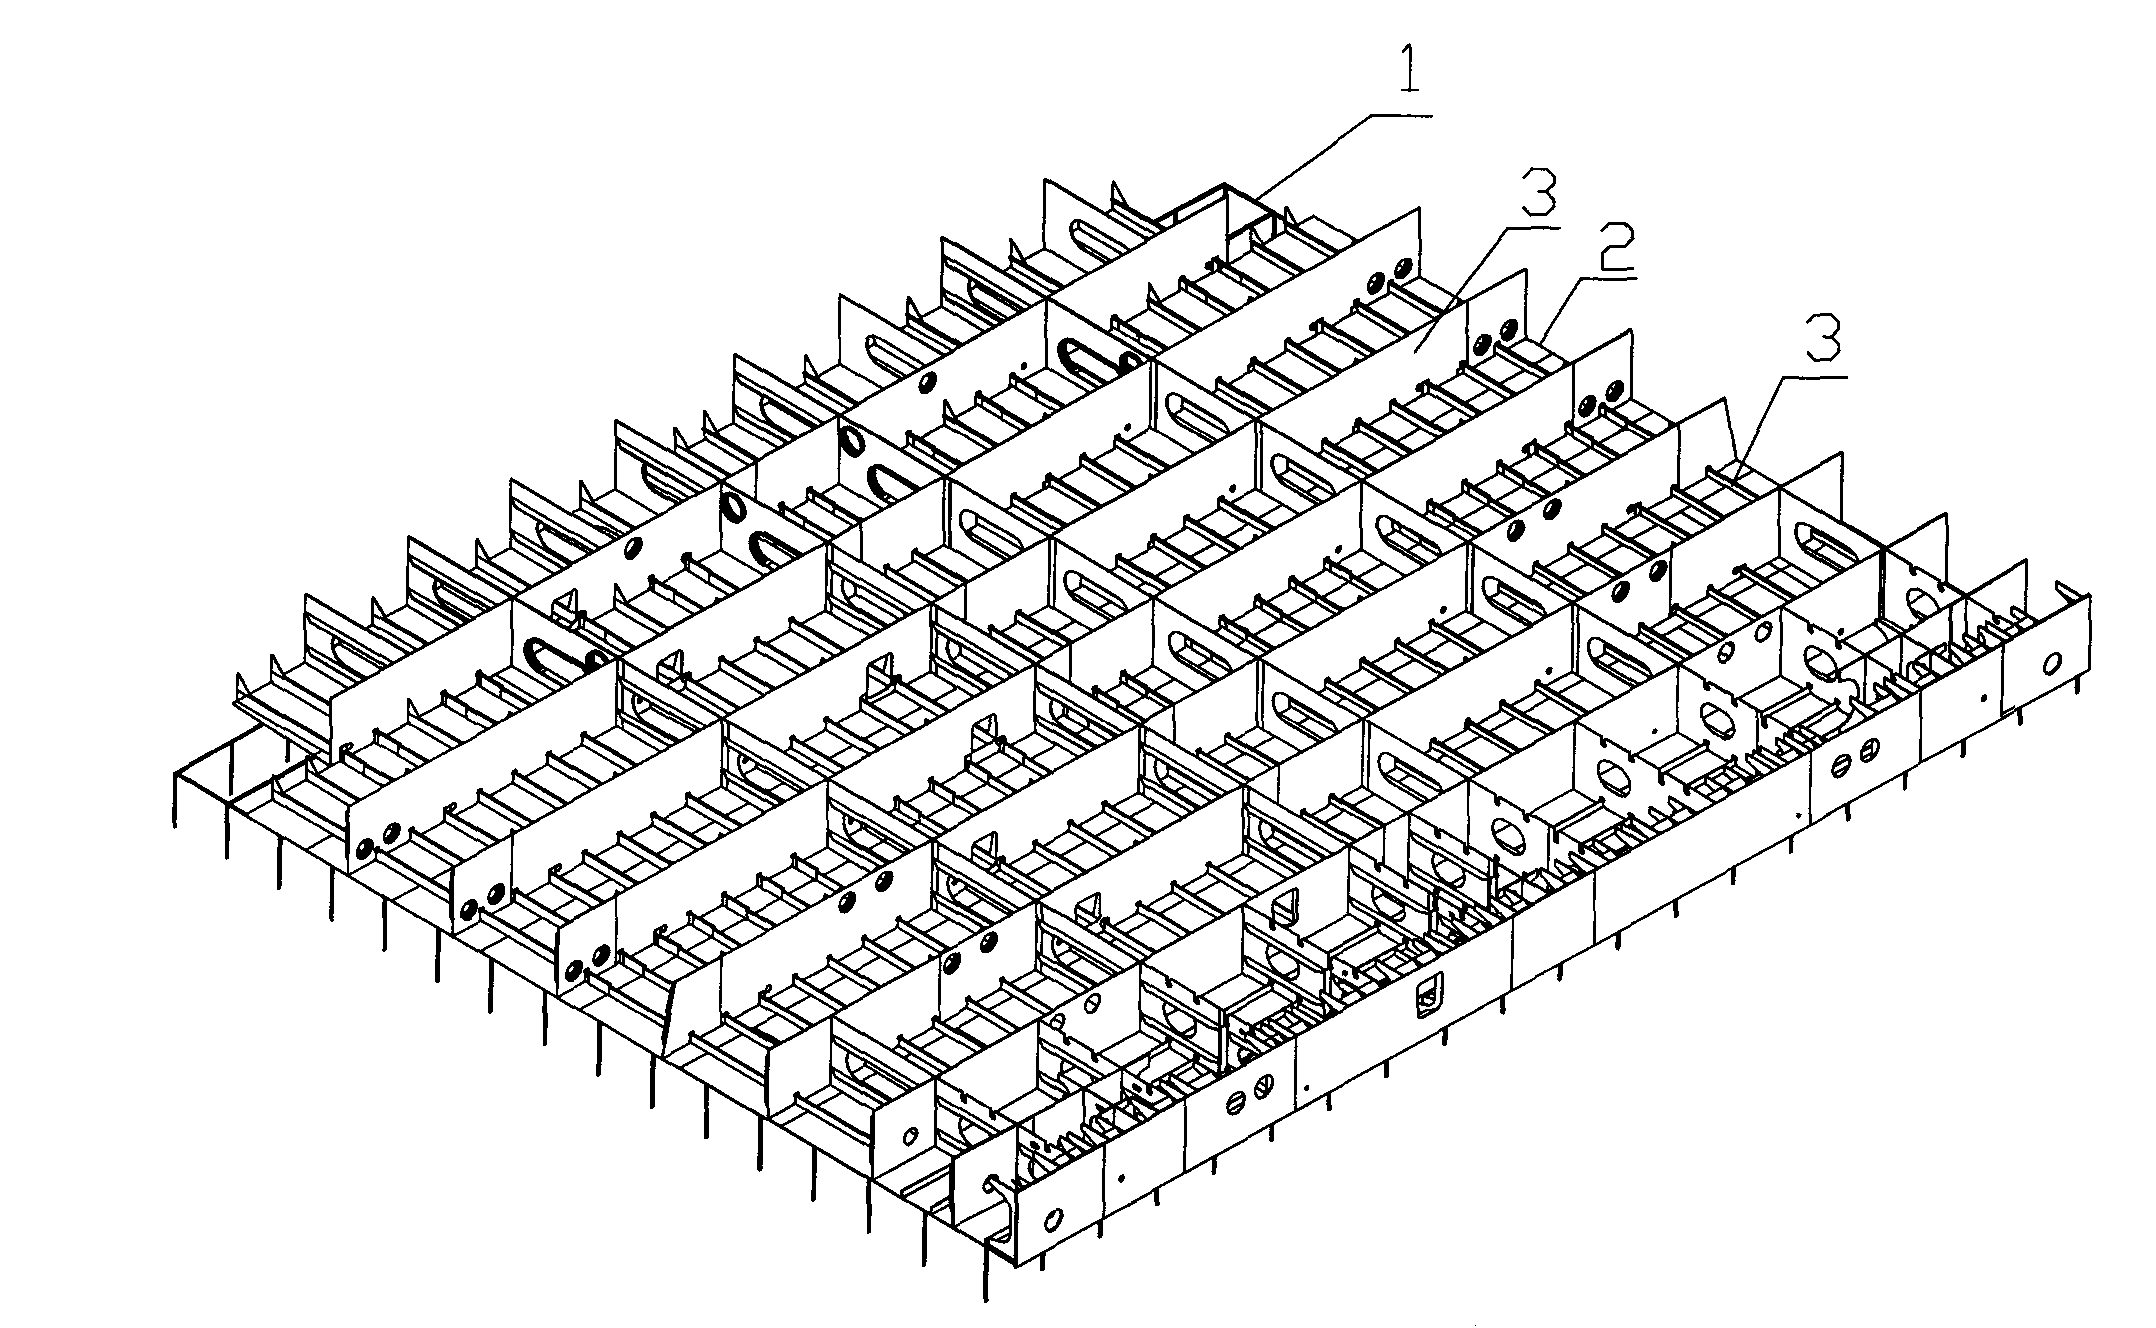 Thwartship bulkhead subsection guide rail frame preassembling process